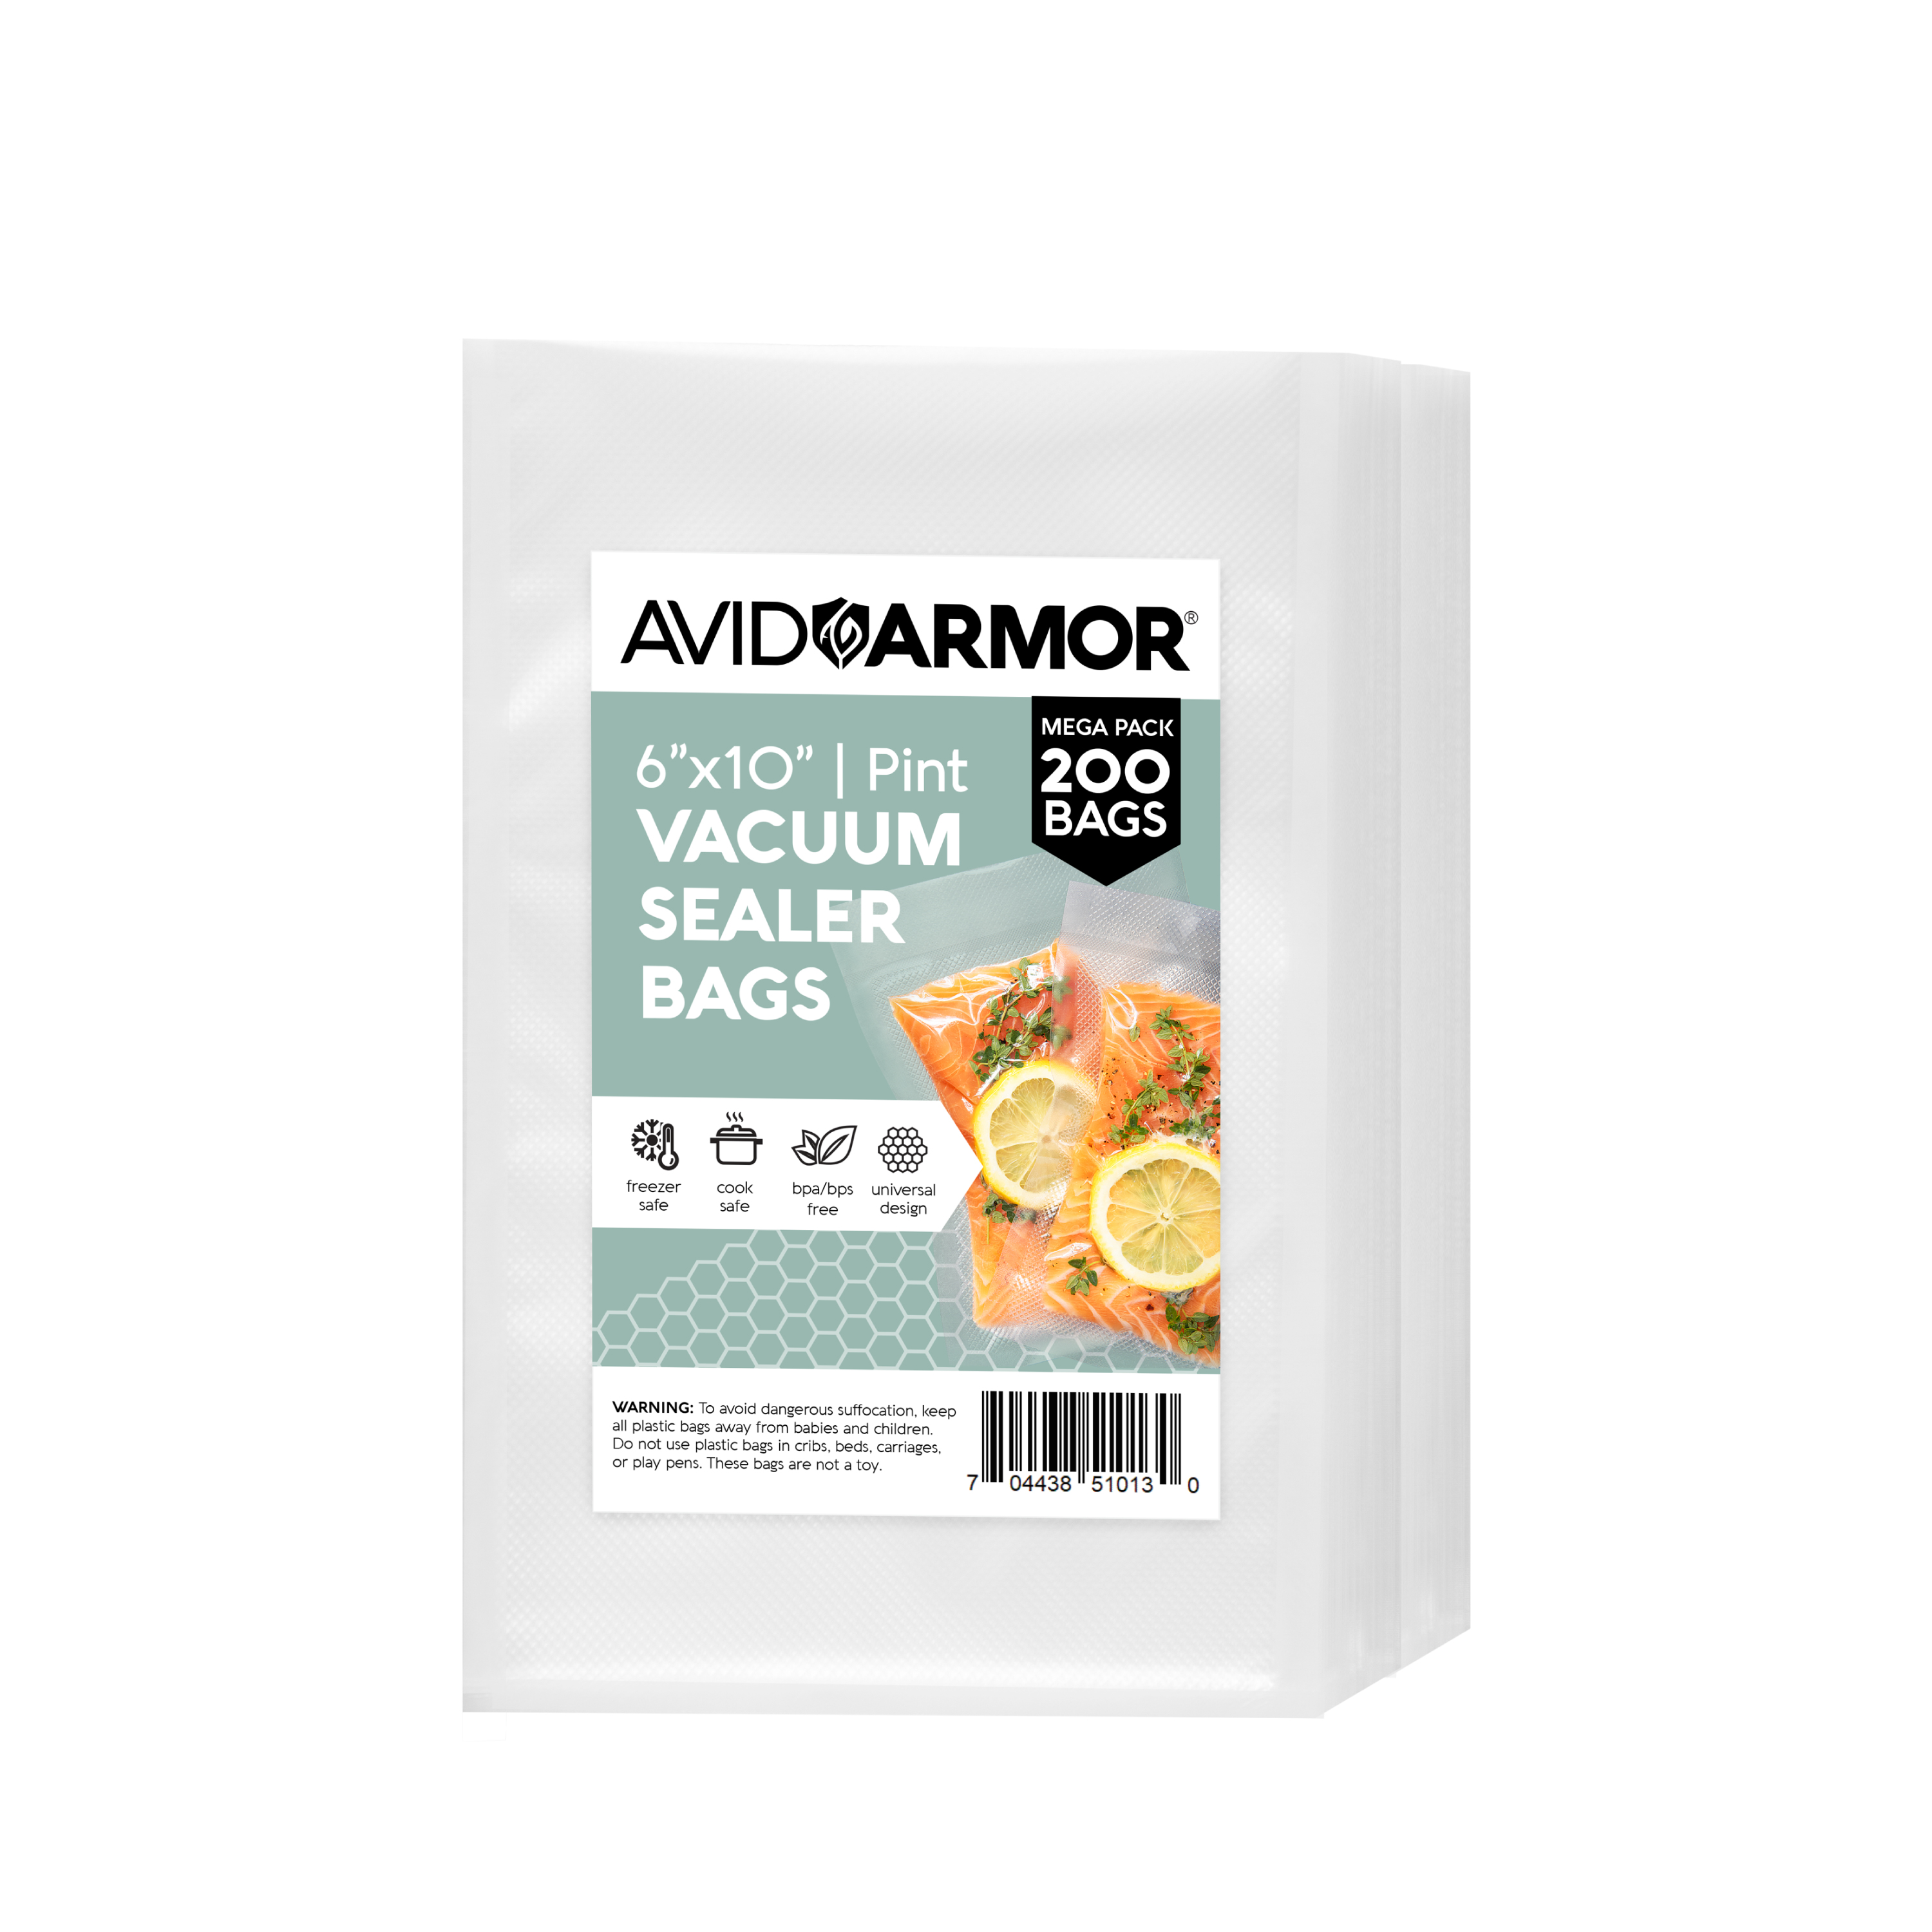 Vacuum Seal Bags For Food,Pint Freezer Bags,Pint Size Vacuum Bags,200  Pint,6x10,Heavy Duty Puncture Prevention,Sous Vide Vacuum Meal  Safe,Universal